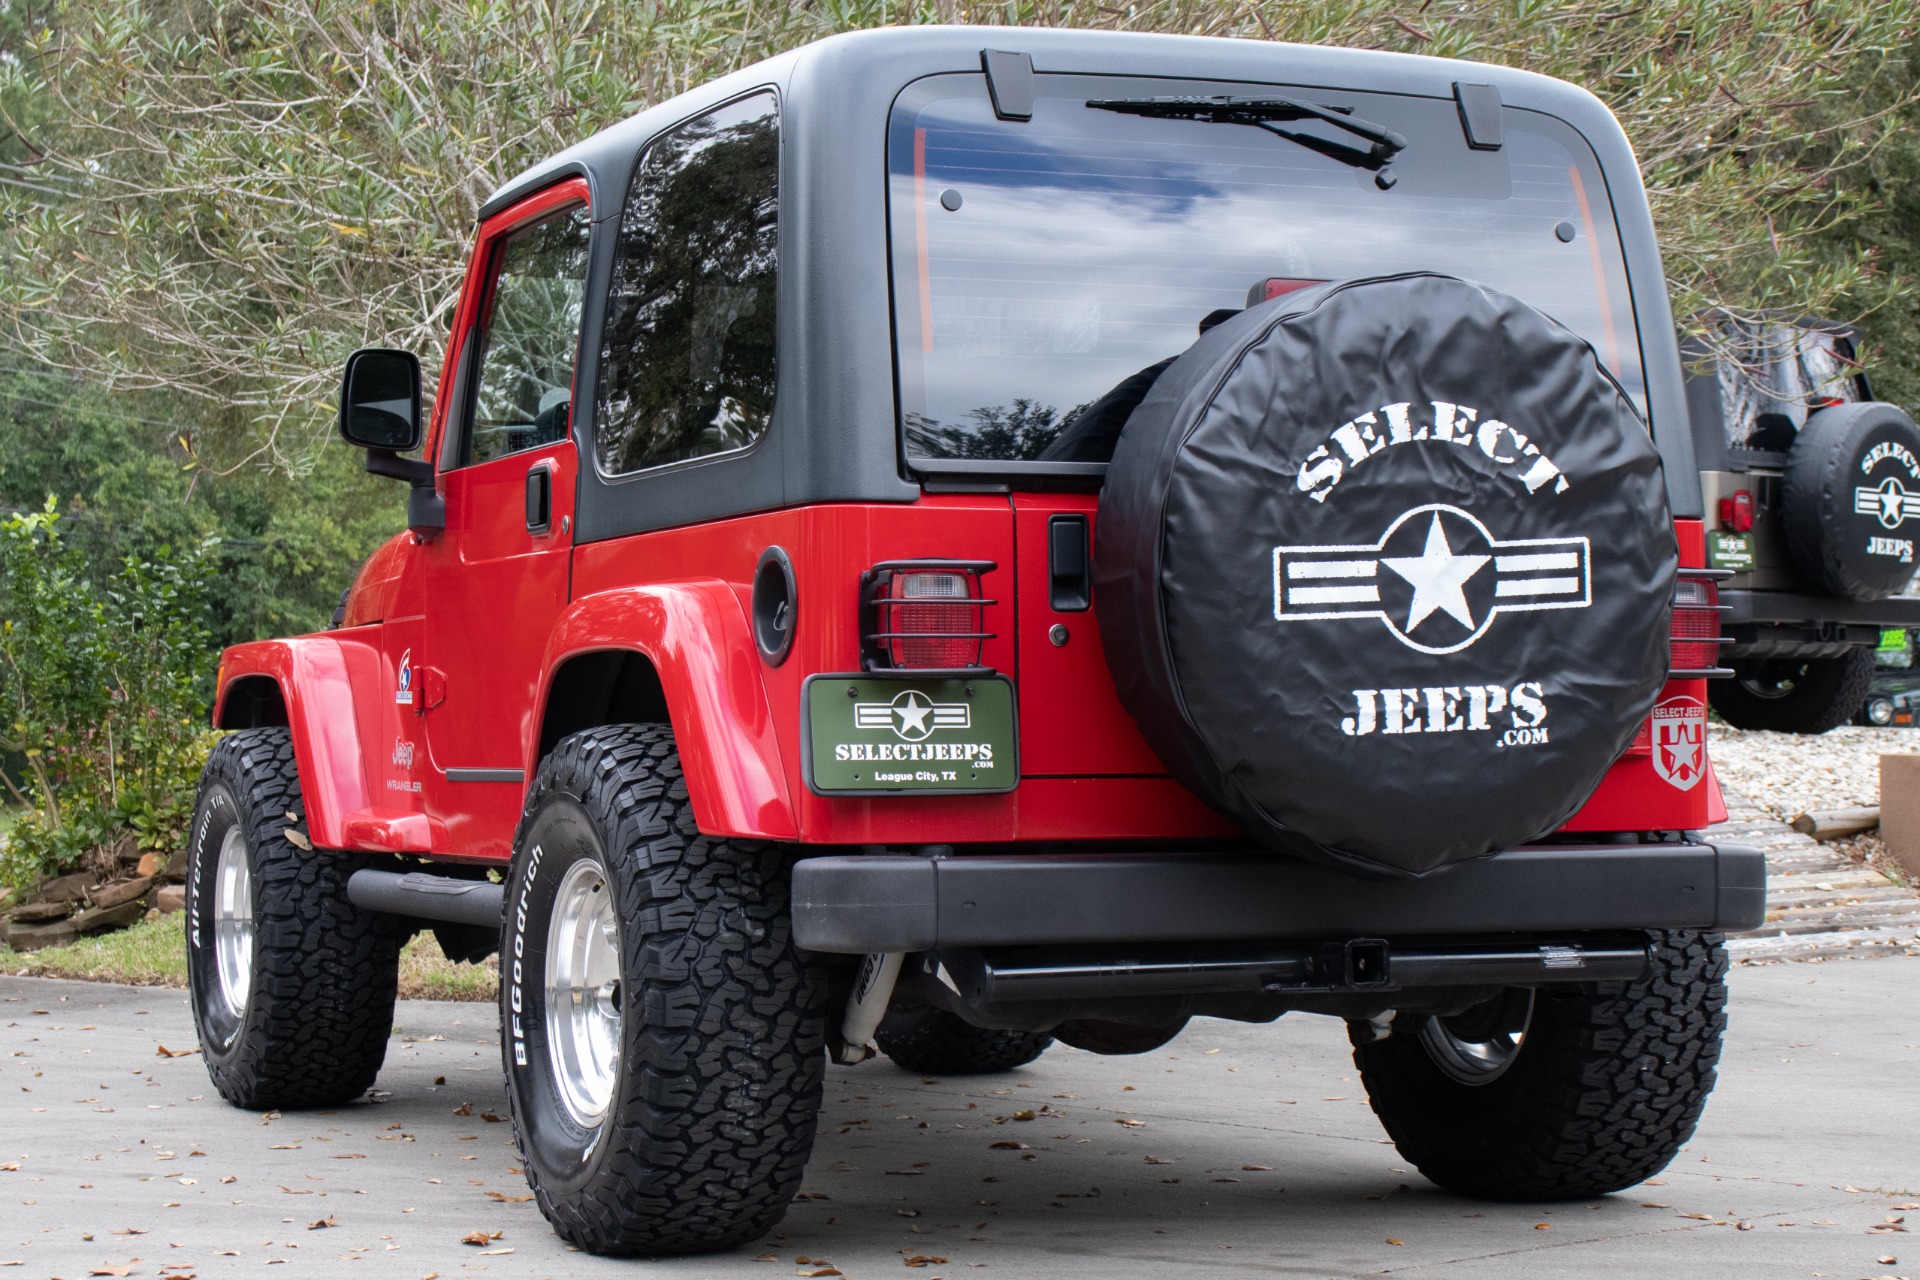 Used 2003 Jeep Wrangler Freedom Edition For Sale ($23,995) | Select Jeeps  Inc. Stock #364709